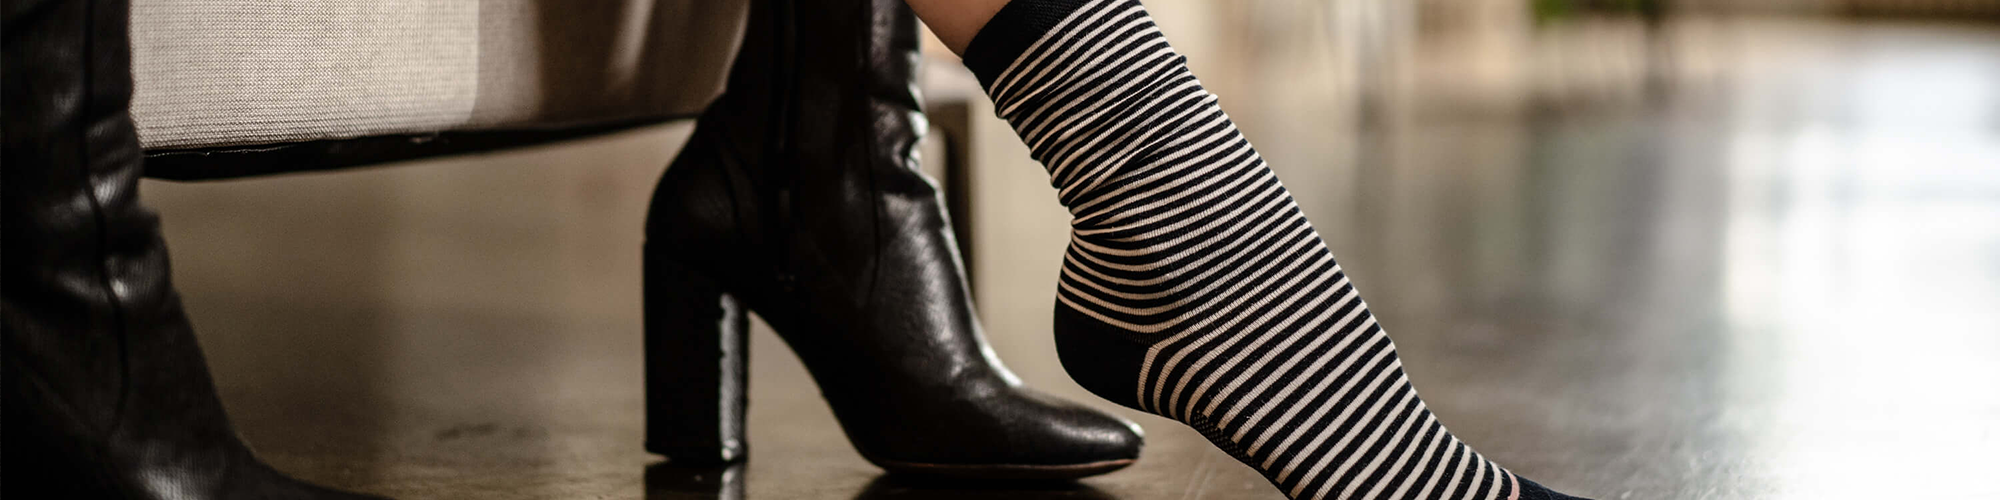 4 Women’s Sock Styling Trends for Fall 2021